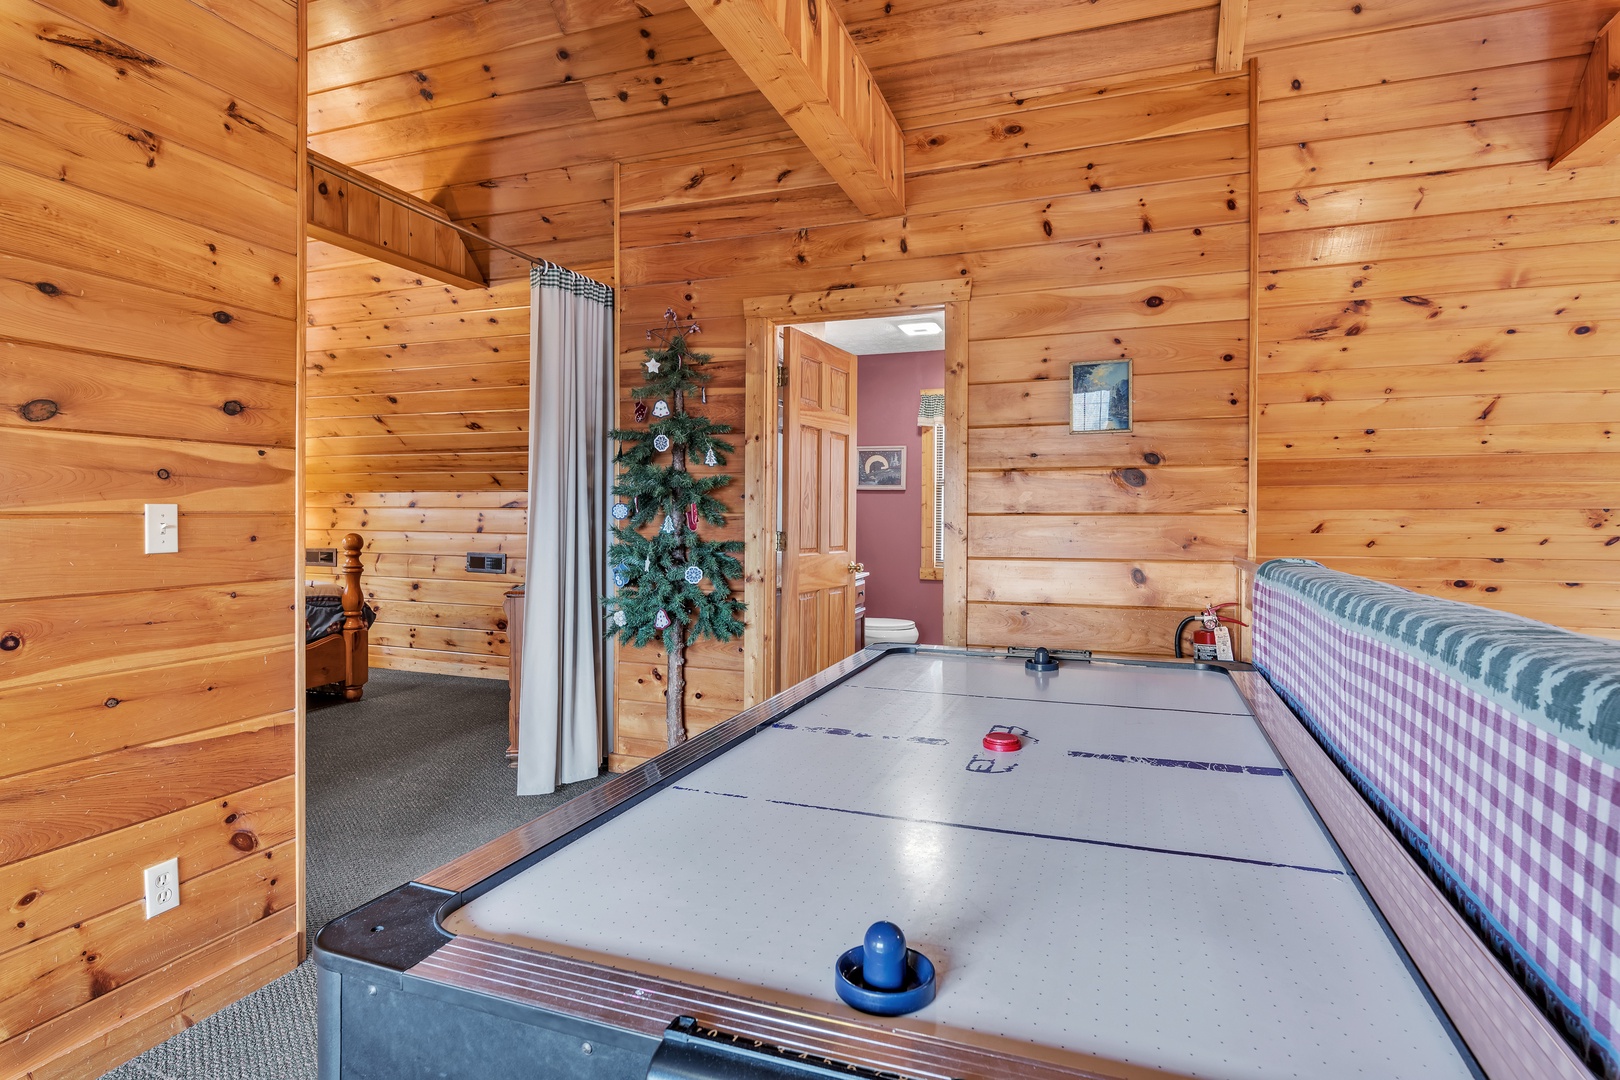 Elevate your stay with a game of air hockey in the loft